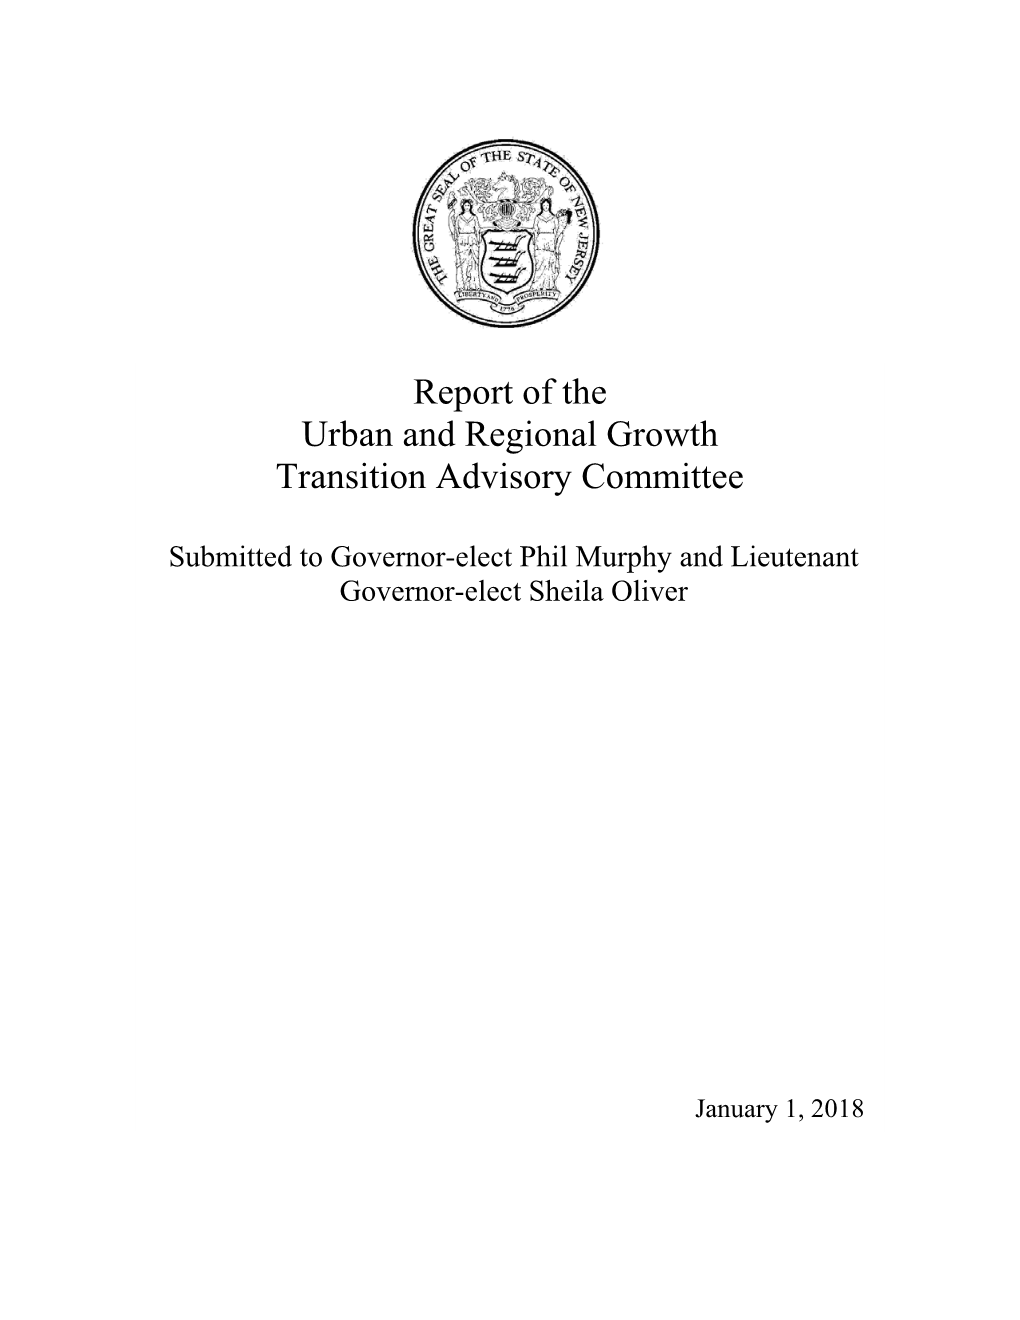 Report of the Urban and Regional Growth Transition Advisory Committee